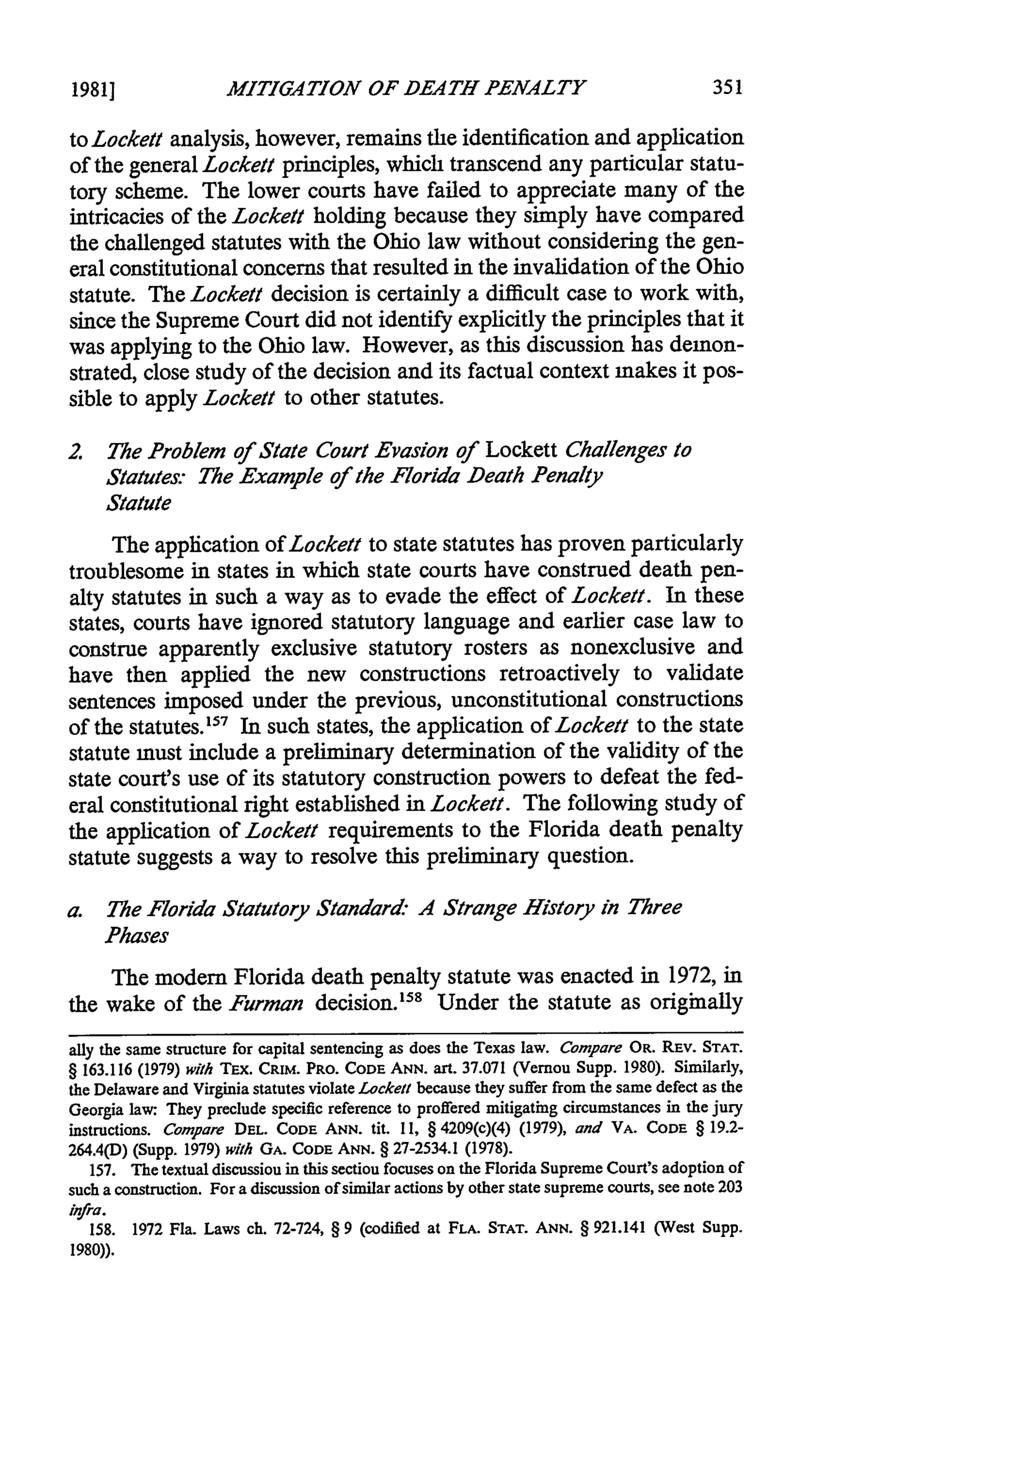 19811 MITIGATION OF DEATH PENALTY to Lockett analysis, however, remains the identification and application of the general Lockett principles, which transcend any particular statutory scheme.